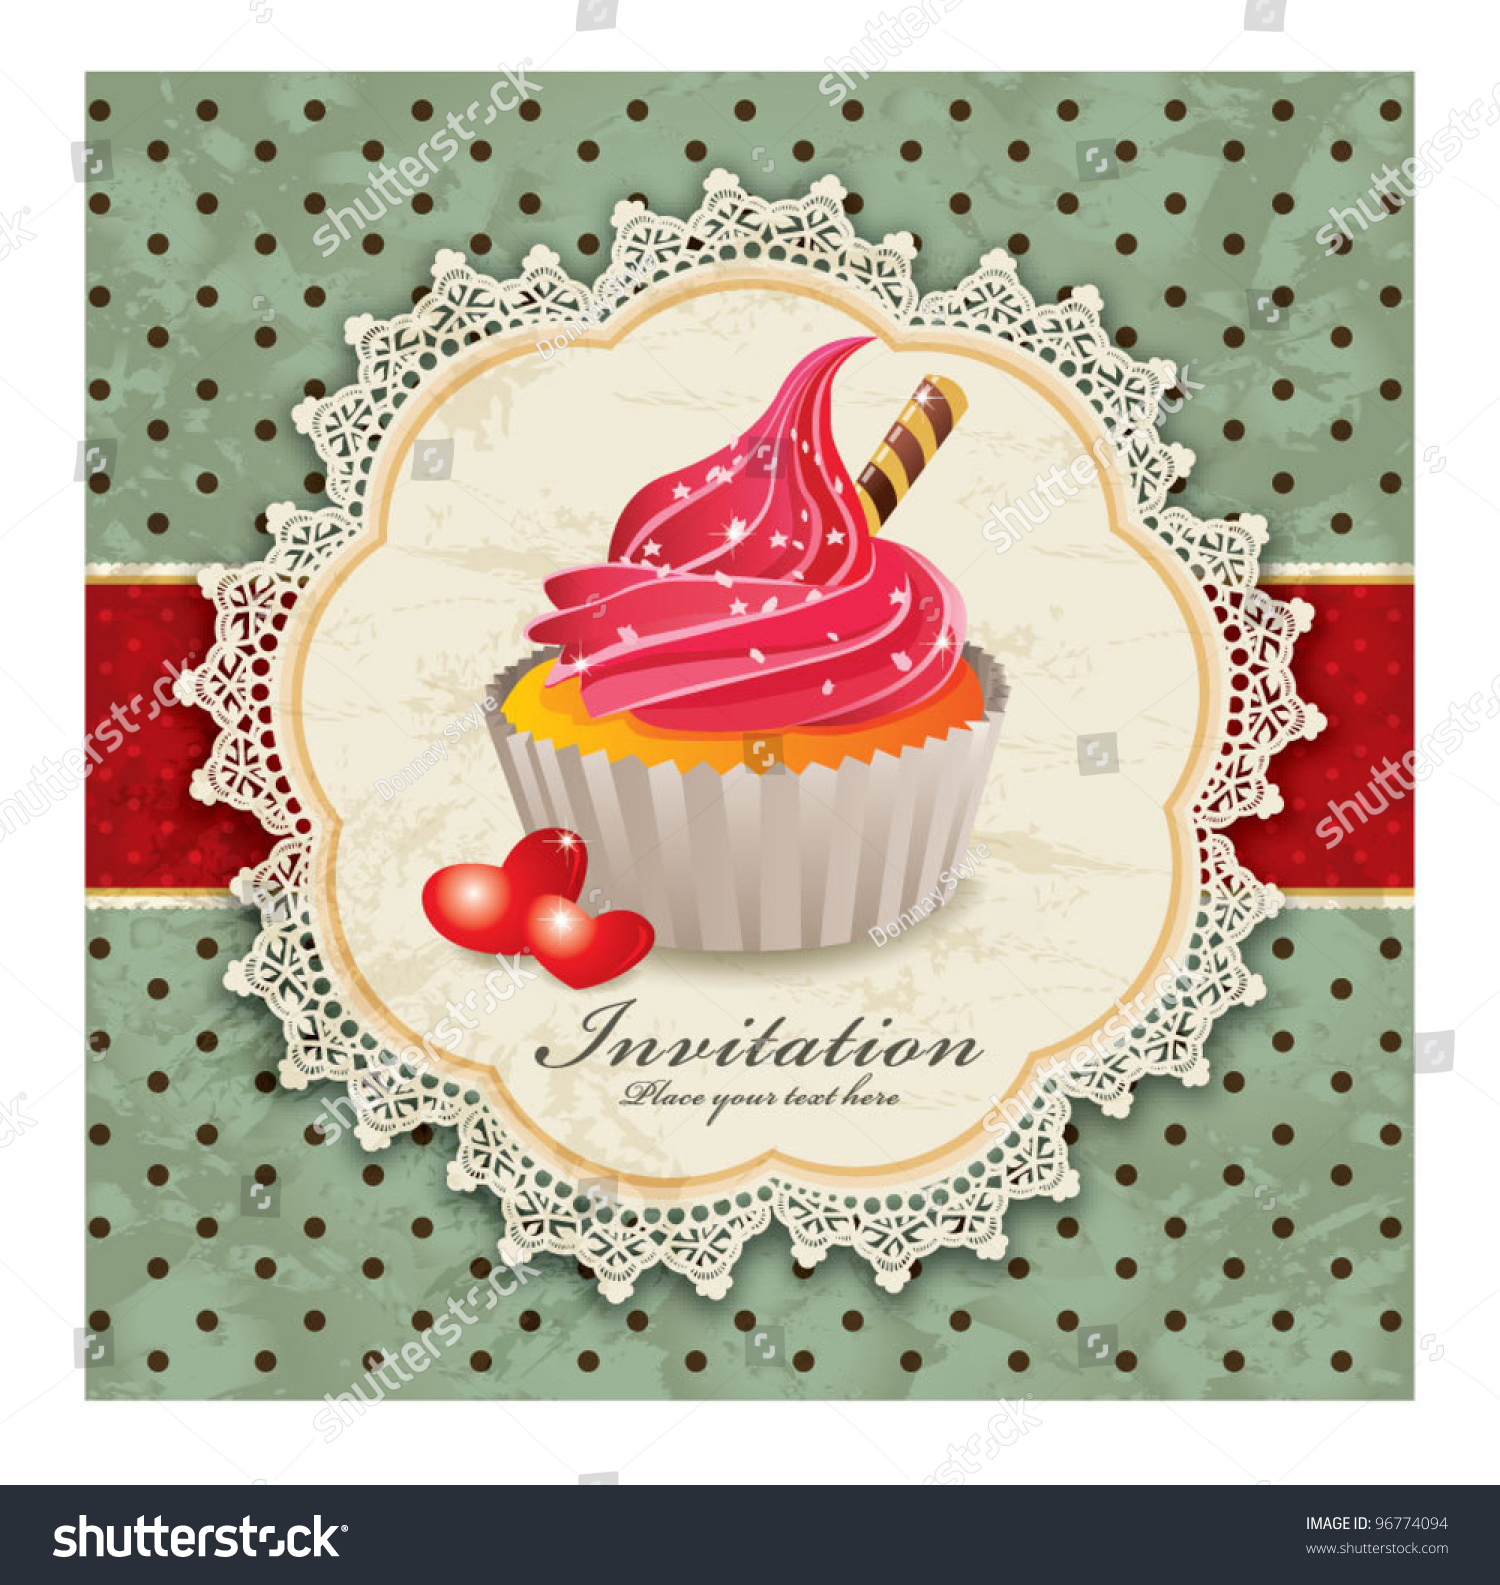 Vintage Background With Cupcake (Y) Stock Vector ...
